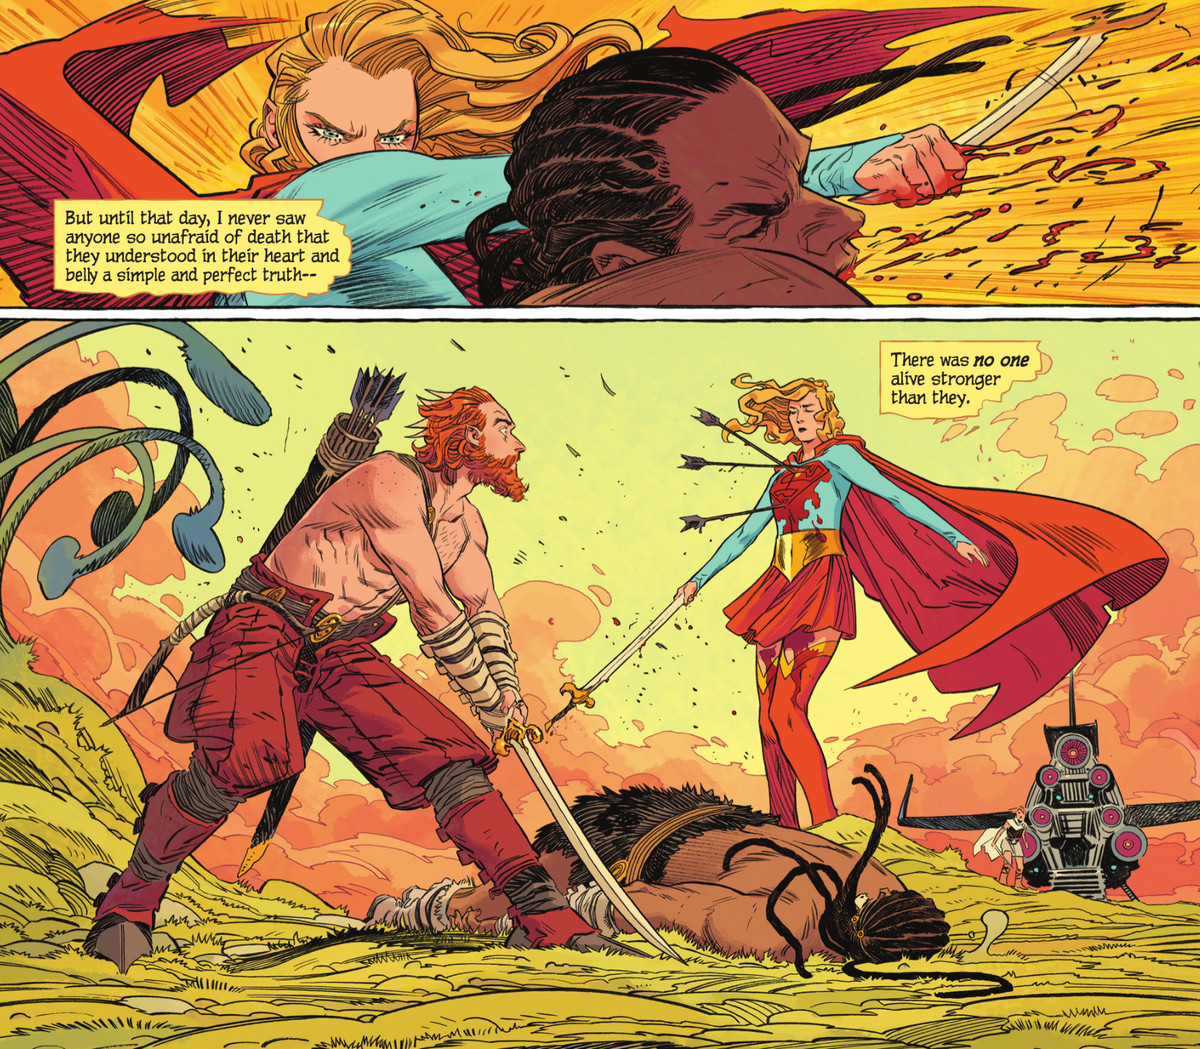 Holding his sword by the tip of the blade, Supergirl punches an assailant to the ground, to the shock of his friend, who fired the three arrows embedded in her bloody chest. “Until that day,” says a narration box, “I never saw anyone so unafraid of death that they understood in their heart [...] there was no one alive stronger than they,” in Supergirl: Woman of Tomorrow #1 (2023). 